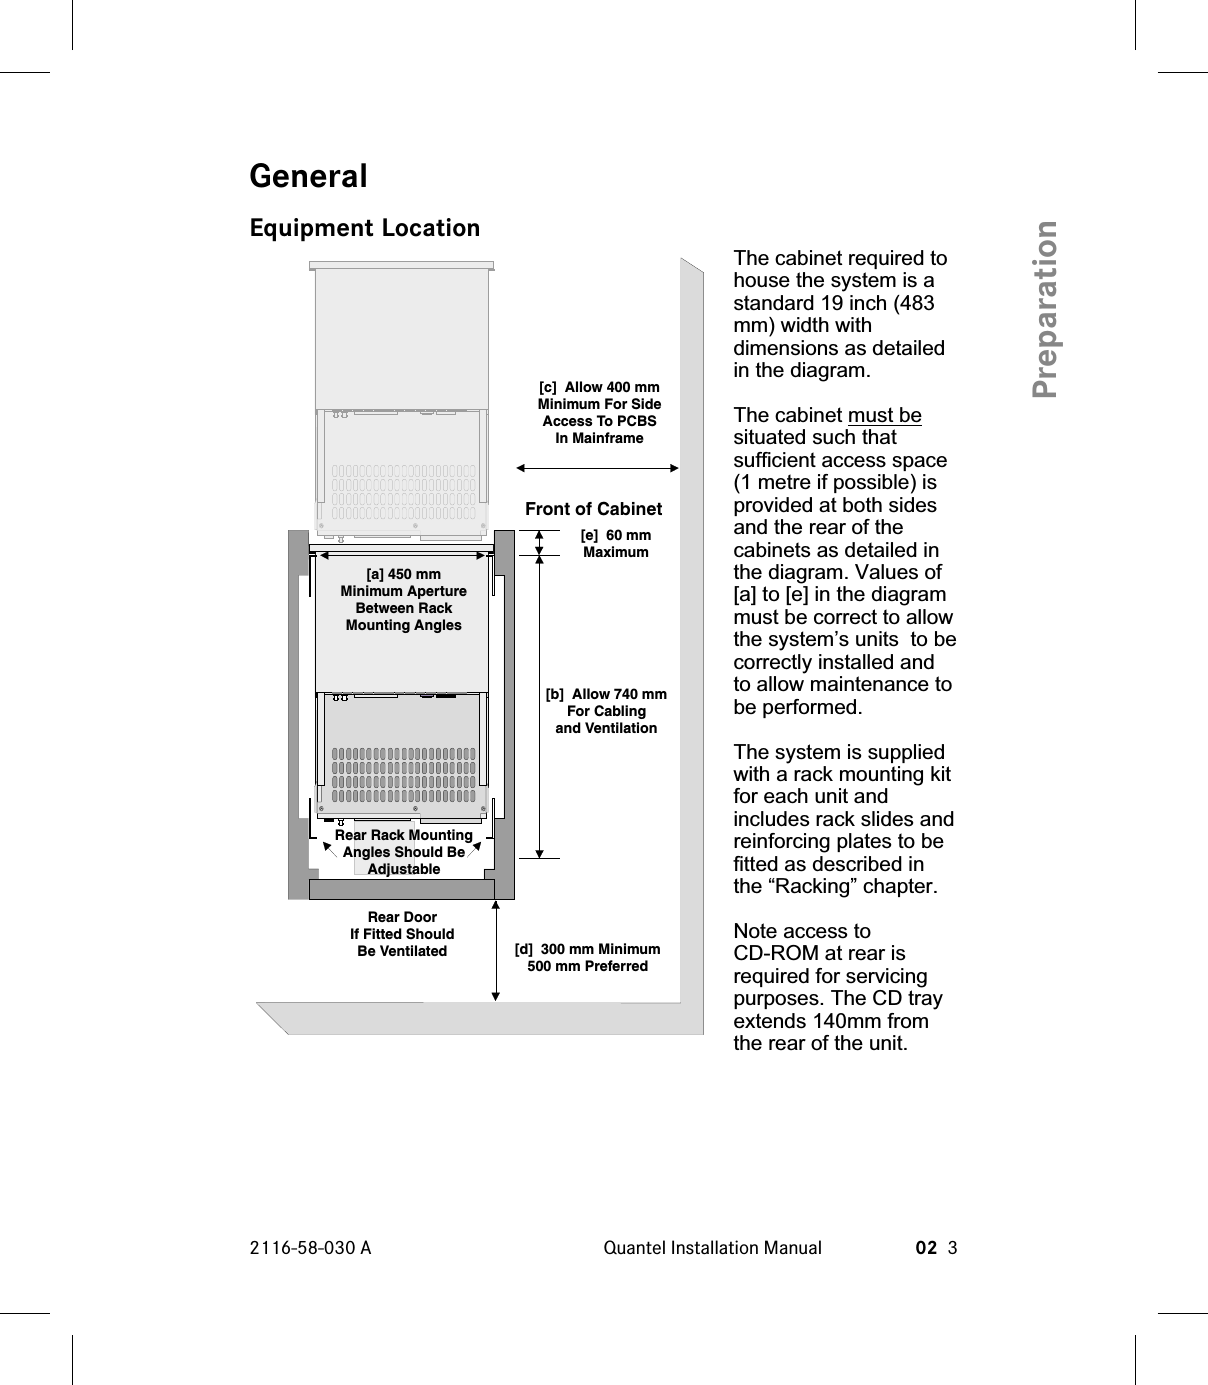 GeneralEquipment LocationThe cabinet required tohouse the system is astandard 19 inch (483mm) width withdimensions as detailedin the diagram.The cabinet must besituated such thatsufficient access space(1 metre if possible) isprovided at both sidesand the rear of thecabinets as detailed inthe diagram. Values of[a] to [e] in the diagrammust be correct to allowthe system’s units to becorrectly installed andto allow maintenance tobe performed.The system is suppliedwith a rack mounting kitfor each unit andincludes rack slides andreinforcing plates to befitted as described inthe “Racking” chapter.Note access toCD-ROM at rear isrequired for servicingpurposes. The CD trayextends 140mm fromthe rear of the unit.2116-58-030 A Quantel Installation Manual 02 3PreparationRear DoorIf Fitted ShouldBe Ventilated[a] 450 mmMinimum ApertureBetween RackMounting Angles[b] Allow 740 mmFor Cablingand Ventilation[d] 300 mm Minimum500 mm Preferred[e] 60 mmMaximum[c] Allow 400 mmMinimum For SideAccess To PCBSIn MainframeFront of CabinetRear Rack MountingAngles Should BeAdjustable